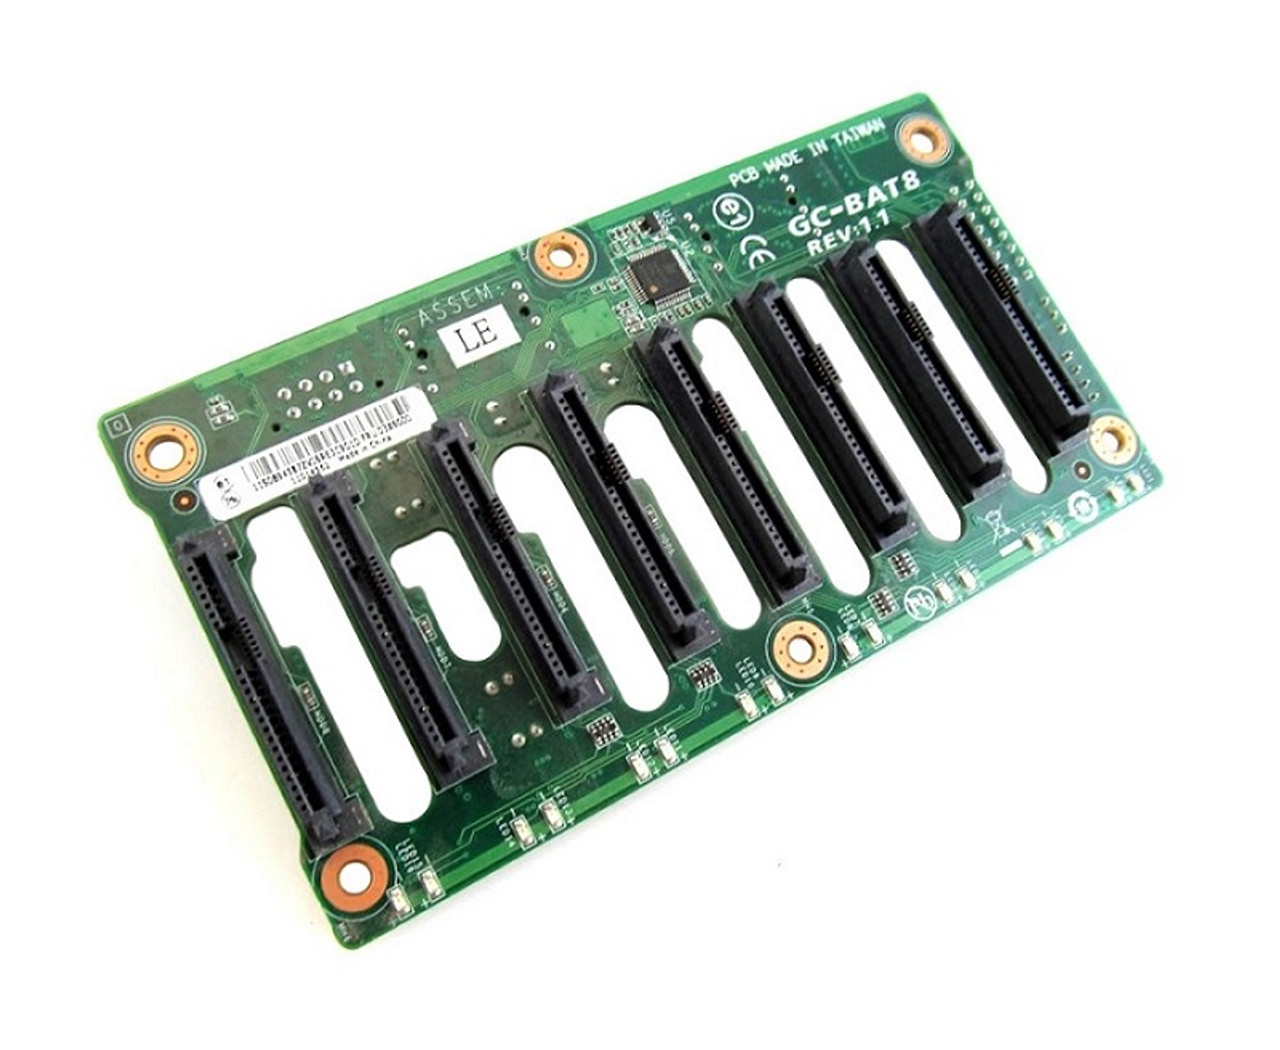 509009-001 - HP Power Supply Backplane with Cage for ProLiant DL320 G6